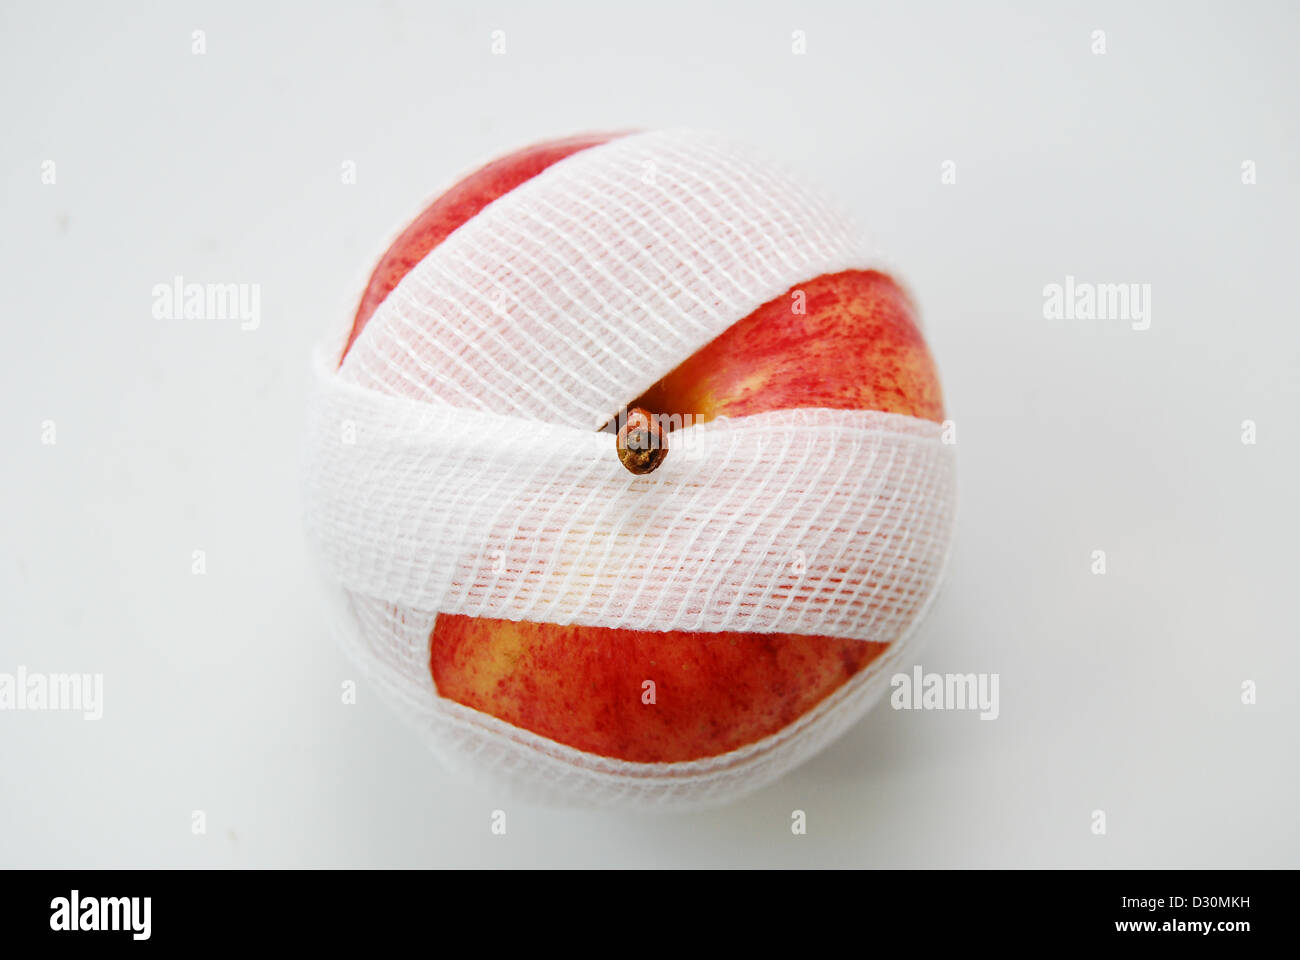 A red and yellow apple on a white background, wrapped in a white gauze bandage with an above, or birds eye view of the fruit. Stock Photo